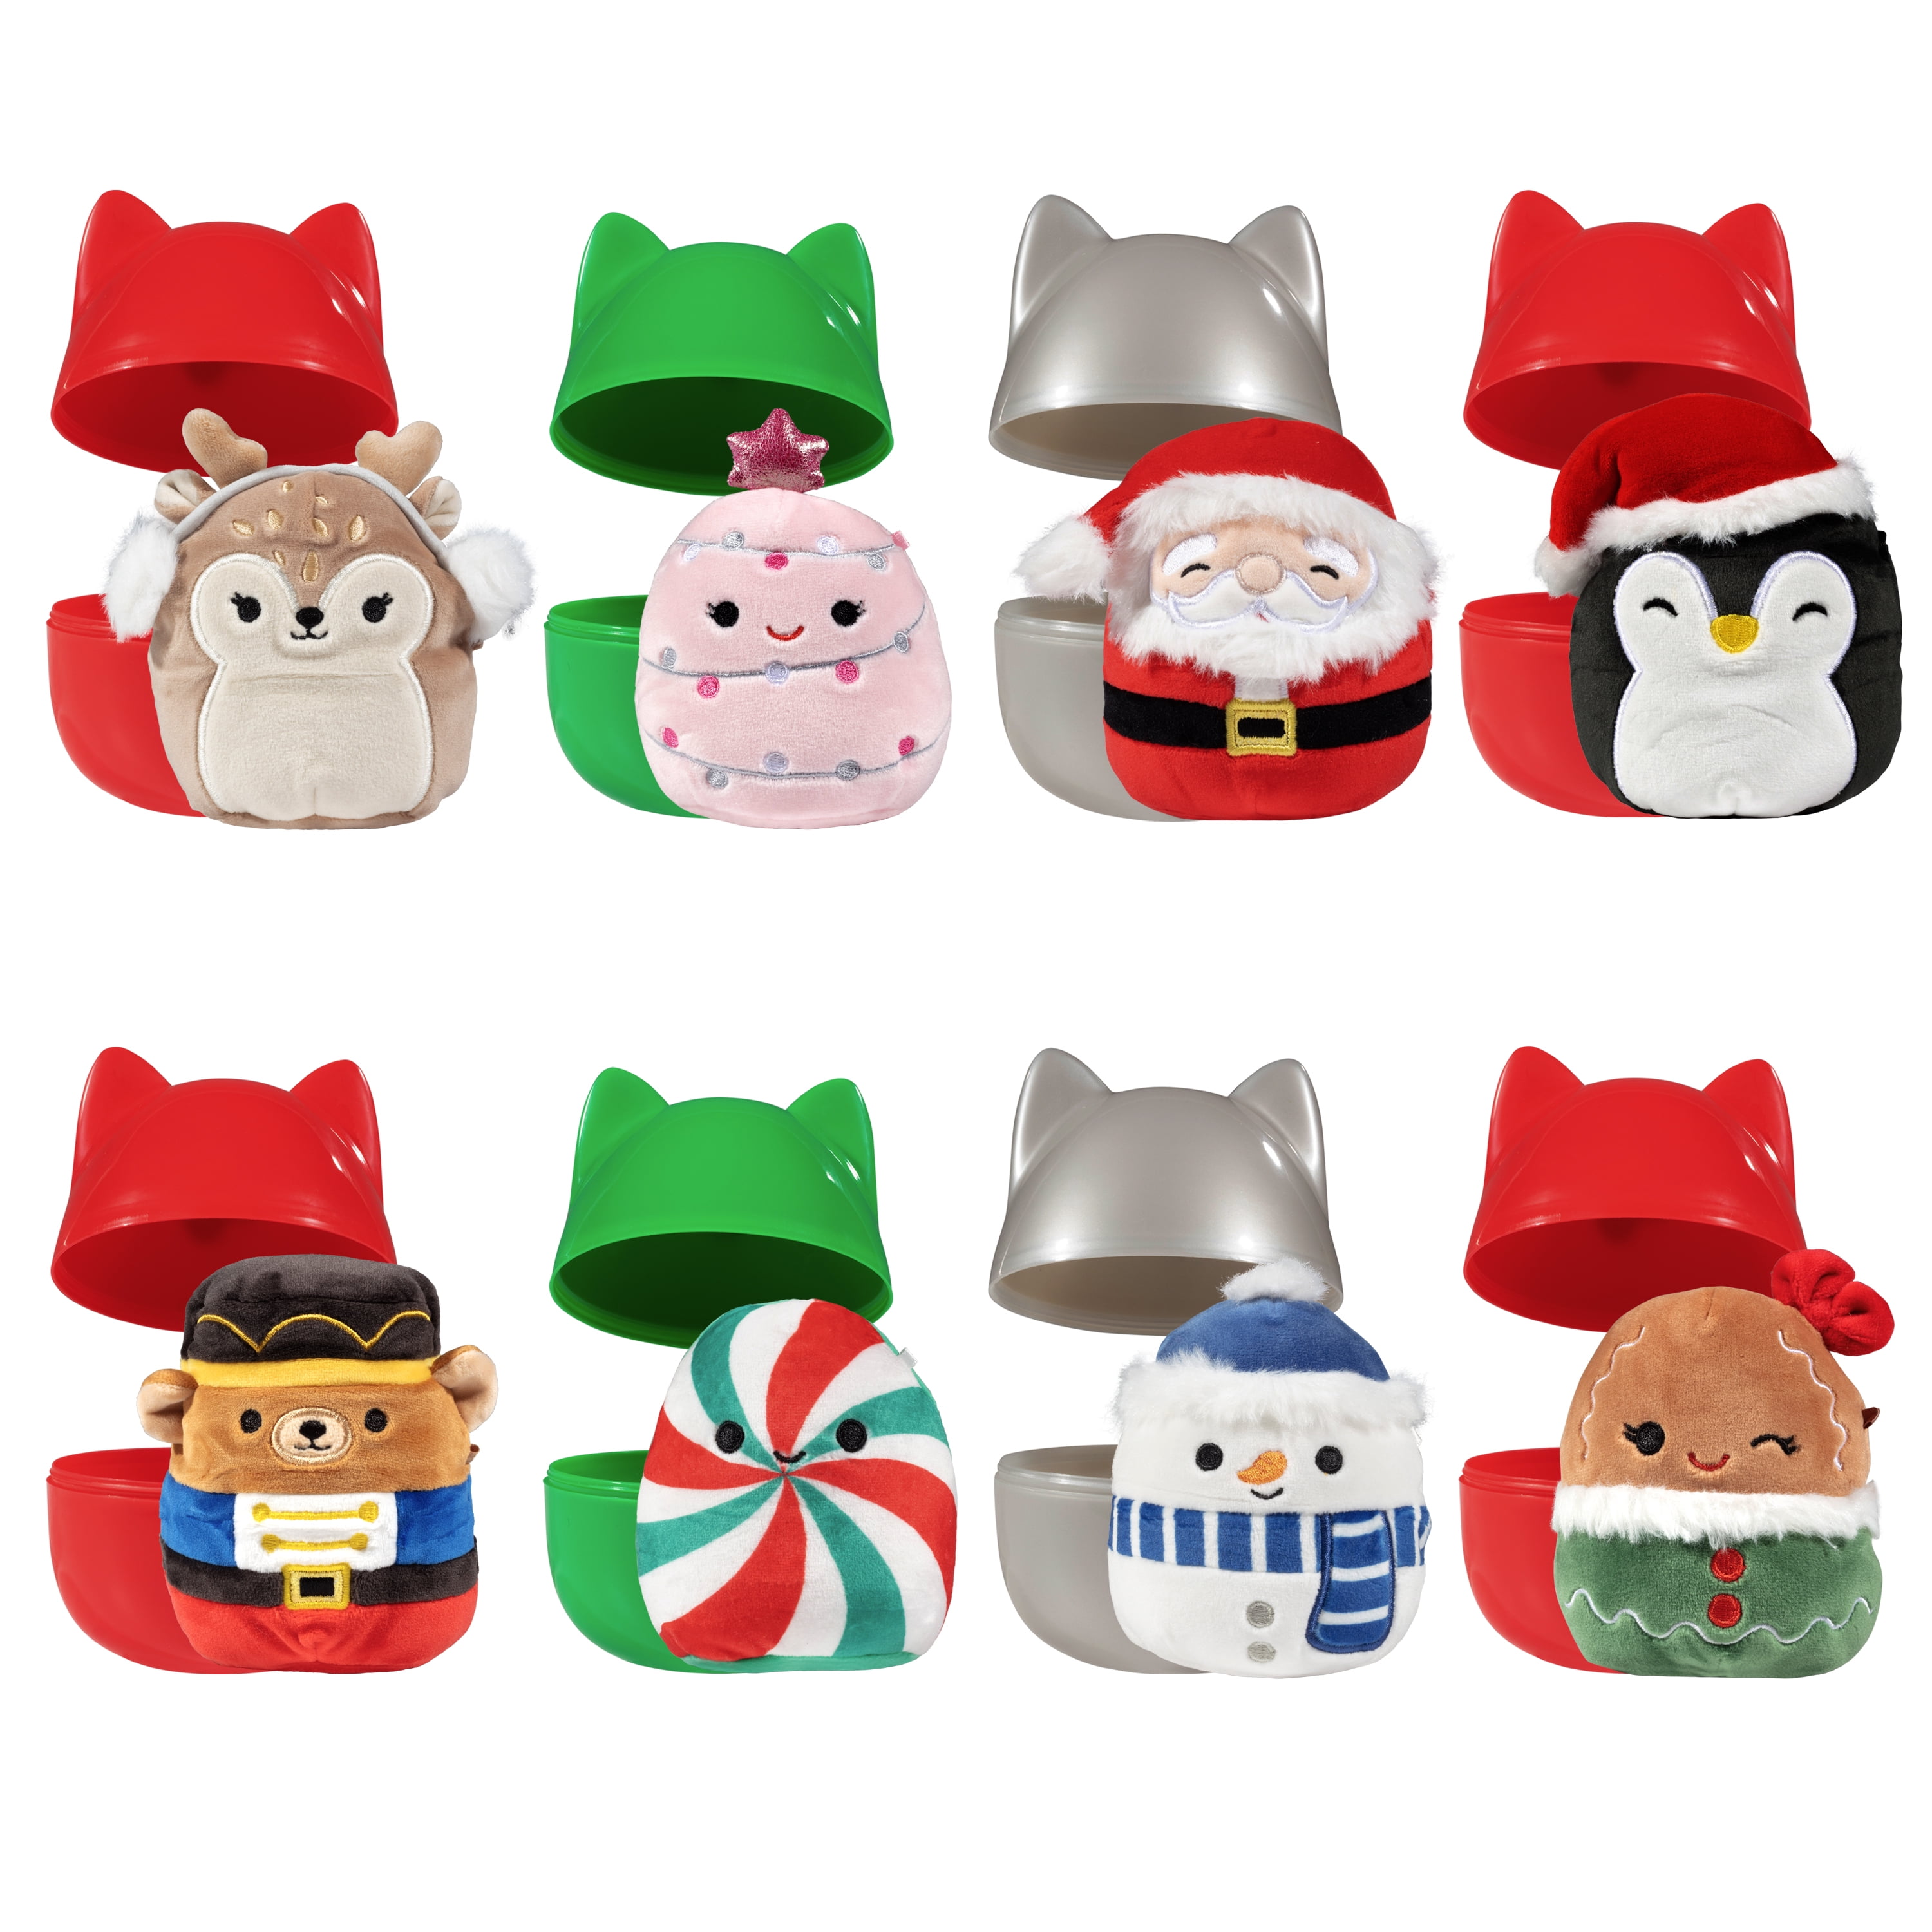 Christmas Squishmallow Plush Toys Are Here and I Need Them All